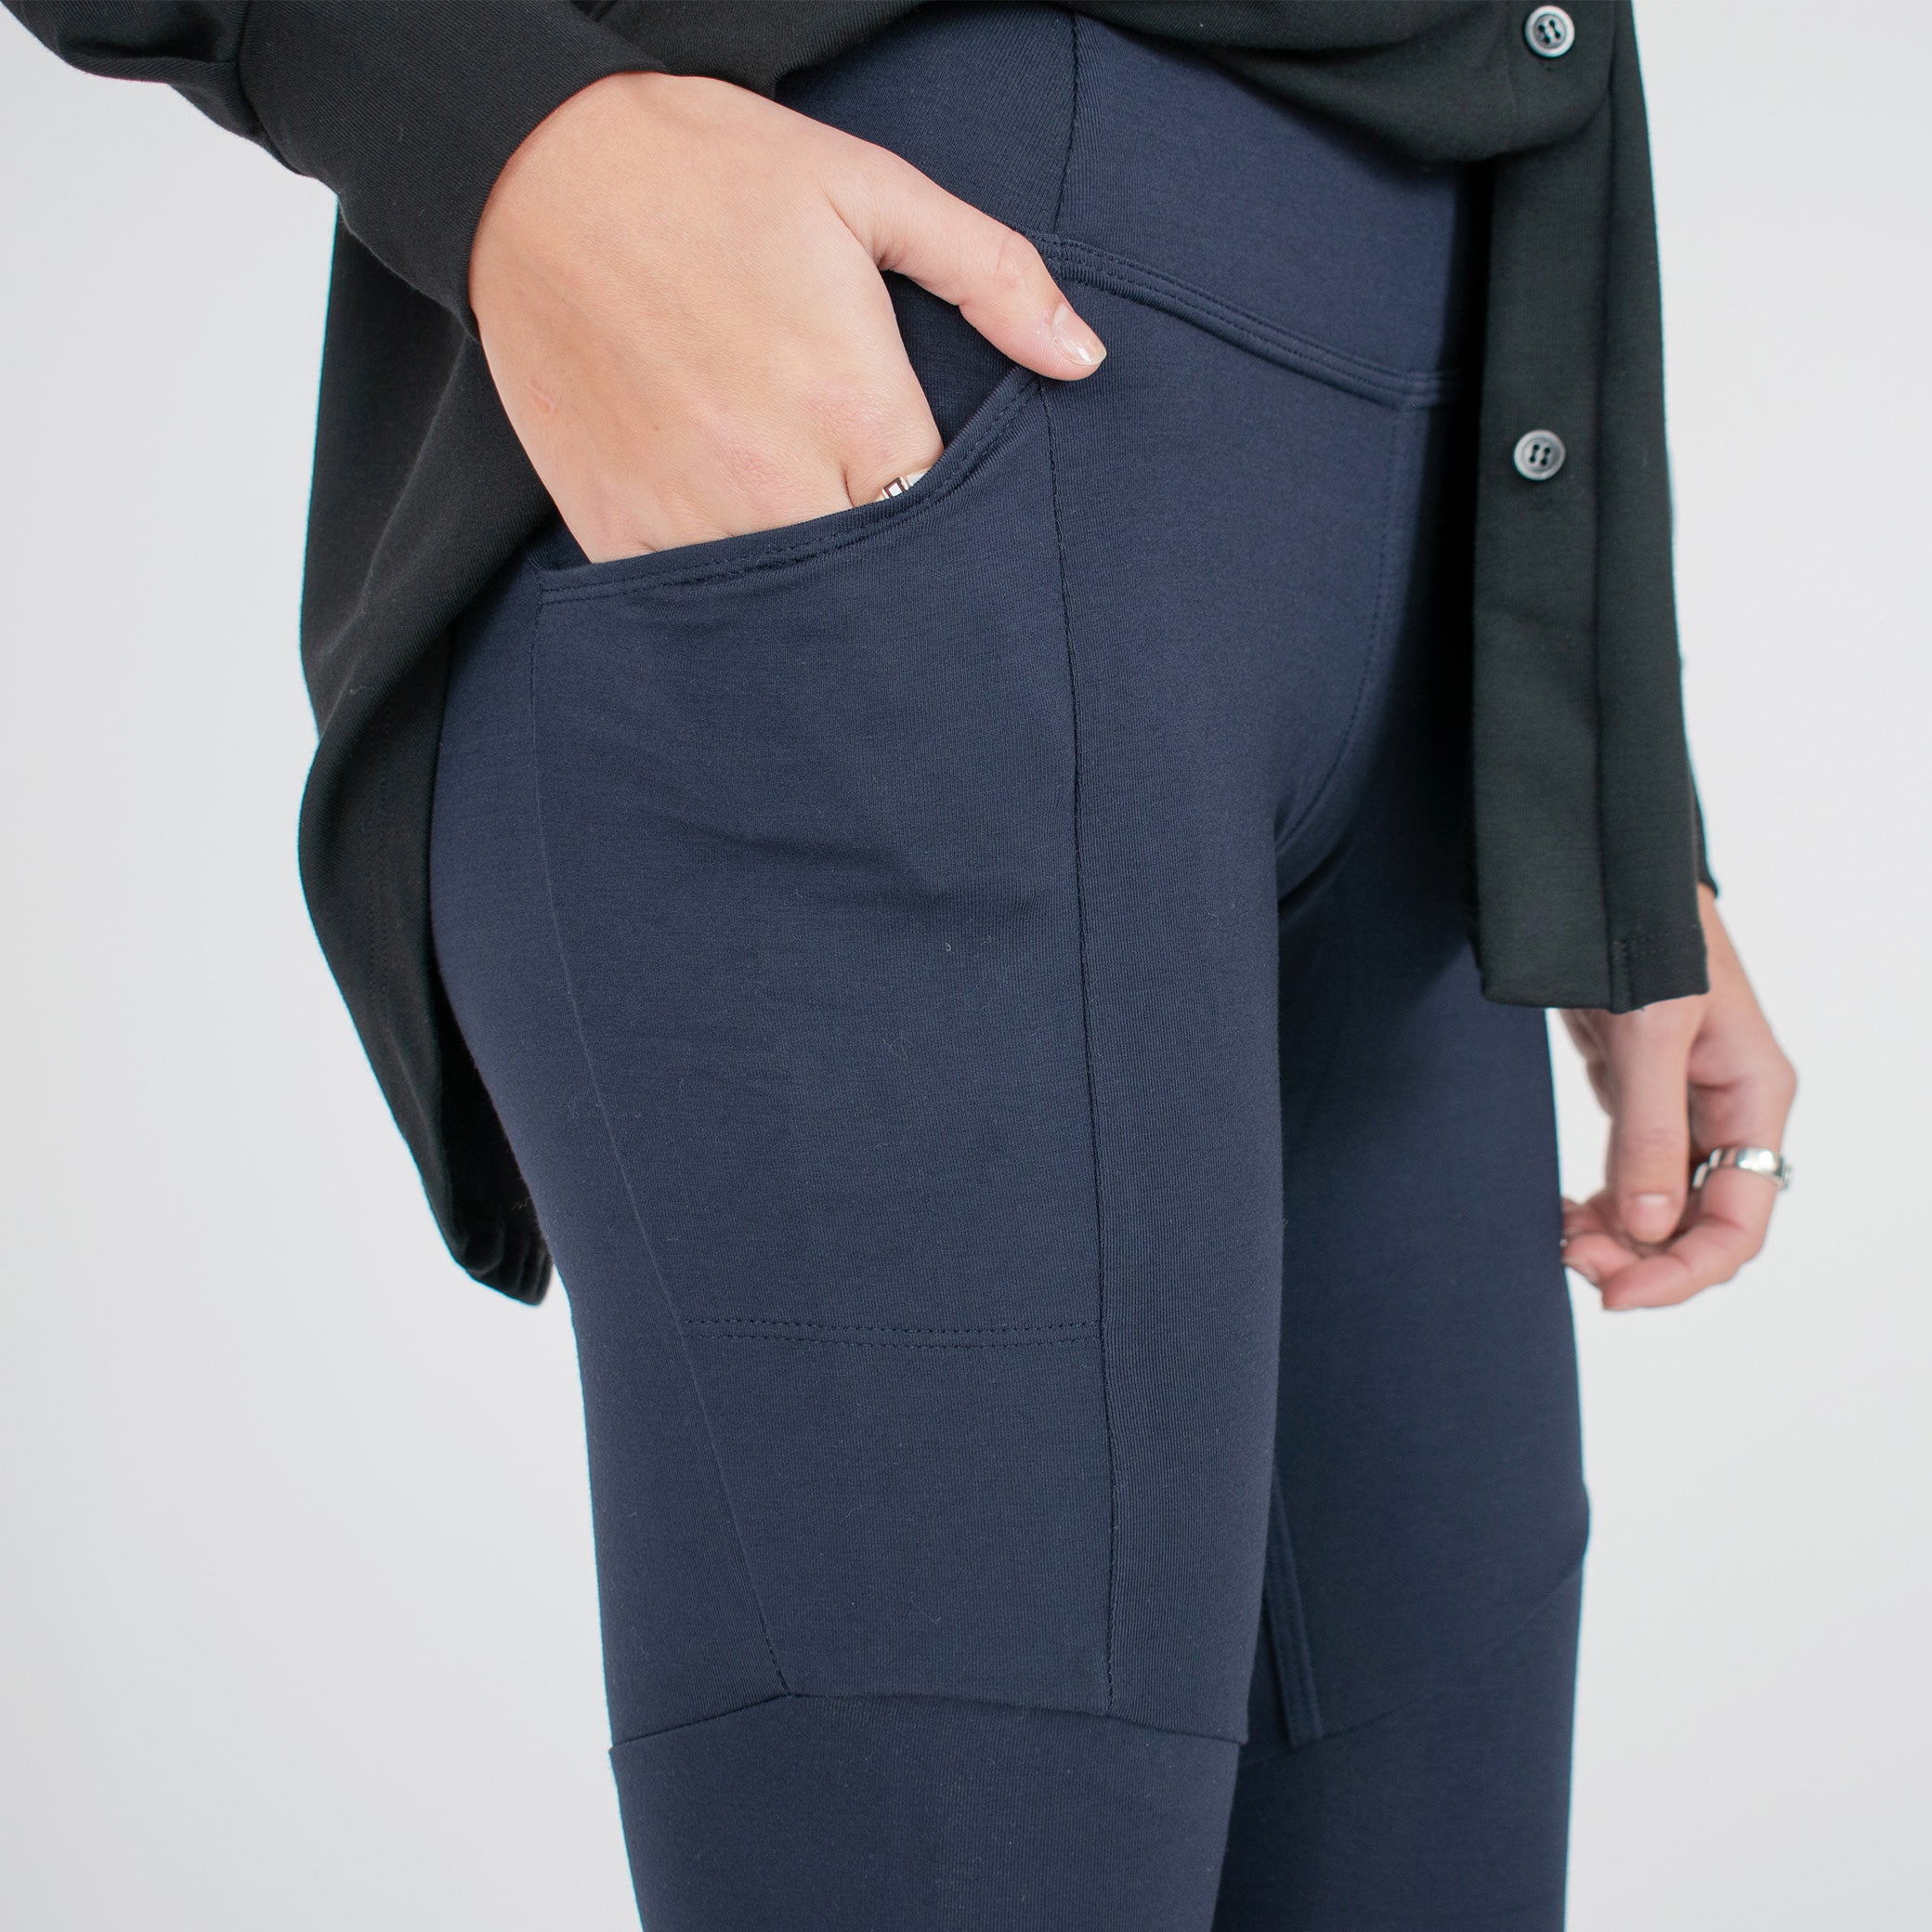 Woman wearing navy blue form fitting stretchy leggings with hip pocket with black button up shirt